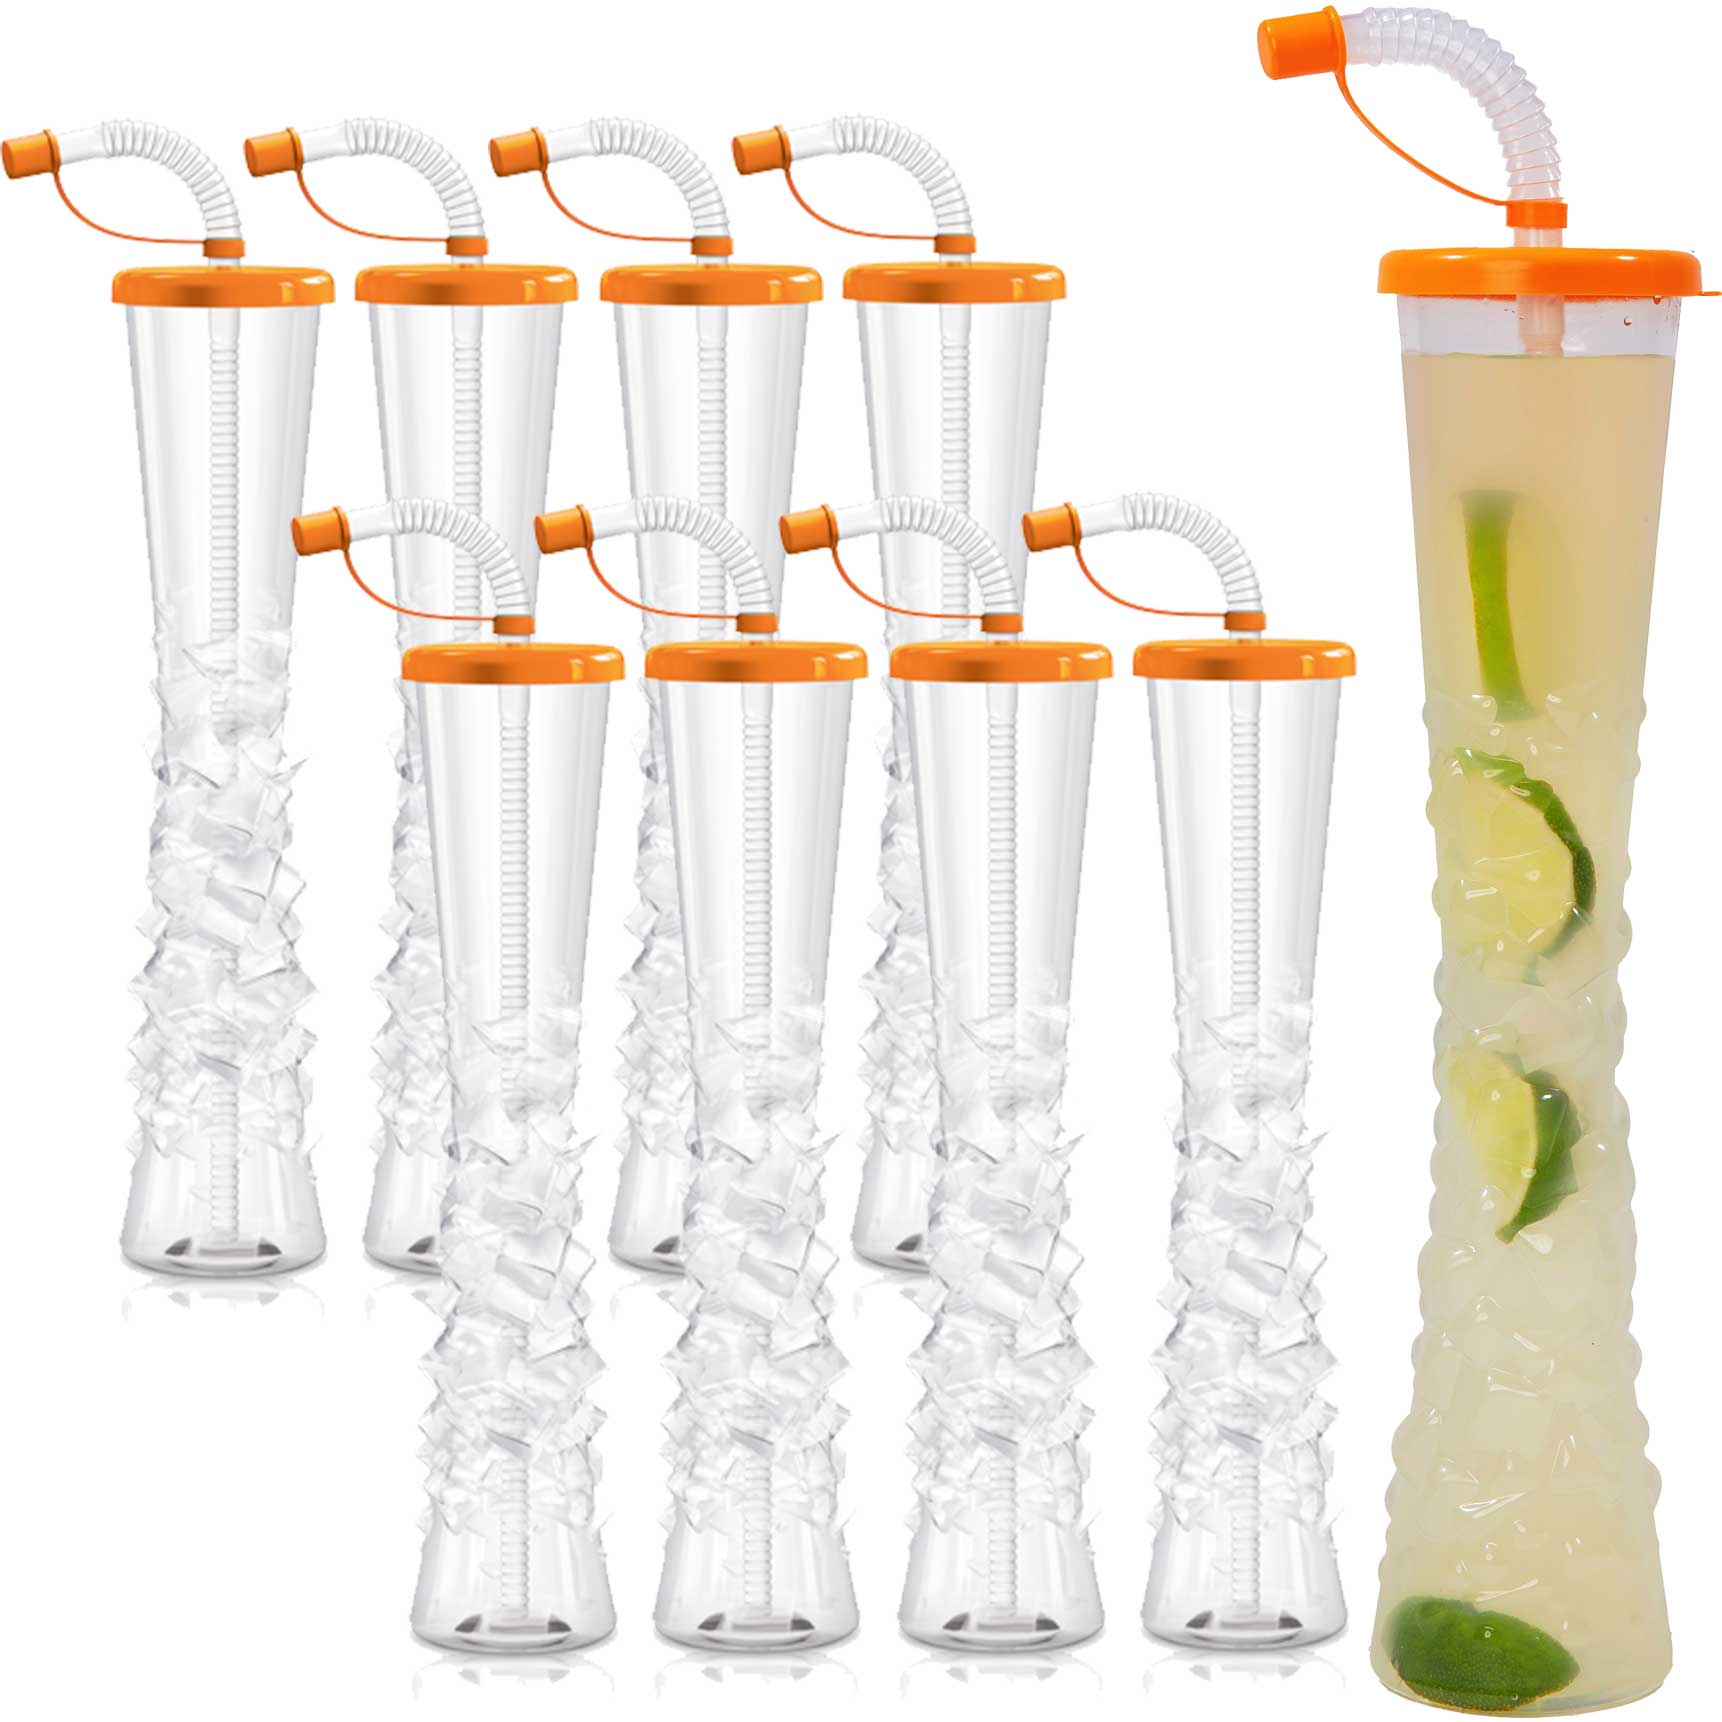 Sweet World USA Yard Cups Ice Yard Cups (54 Cups - Orange) - for Margaritas and Frozen Drinks, Kids Parties - 17oz. (500ml) cups with lids and straws